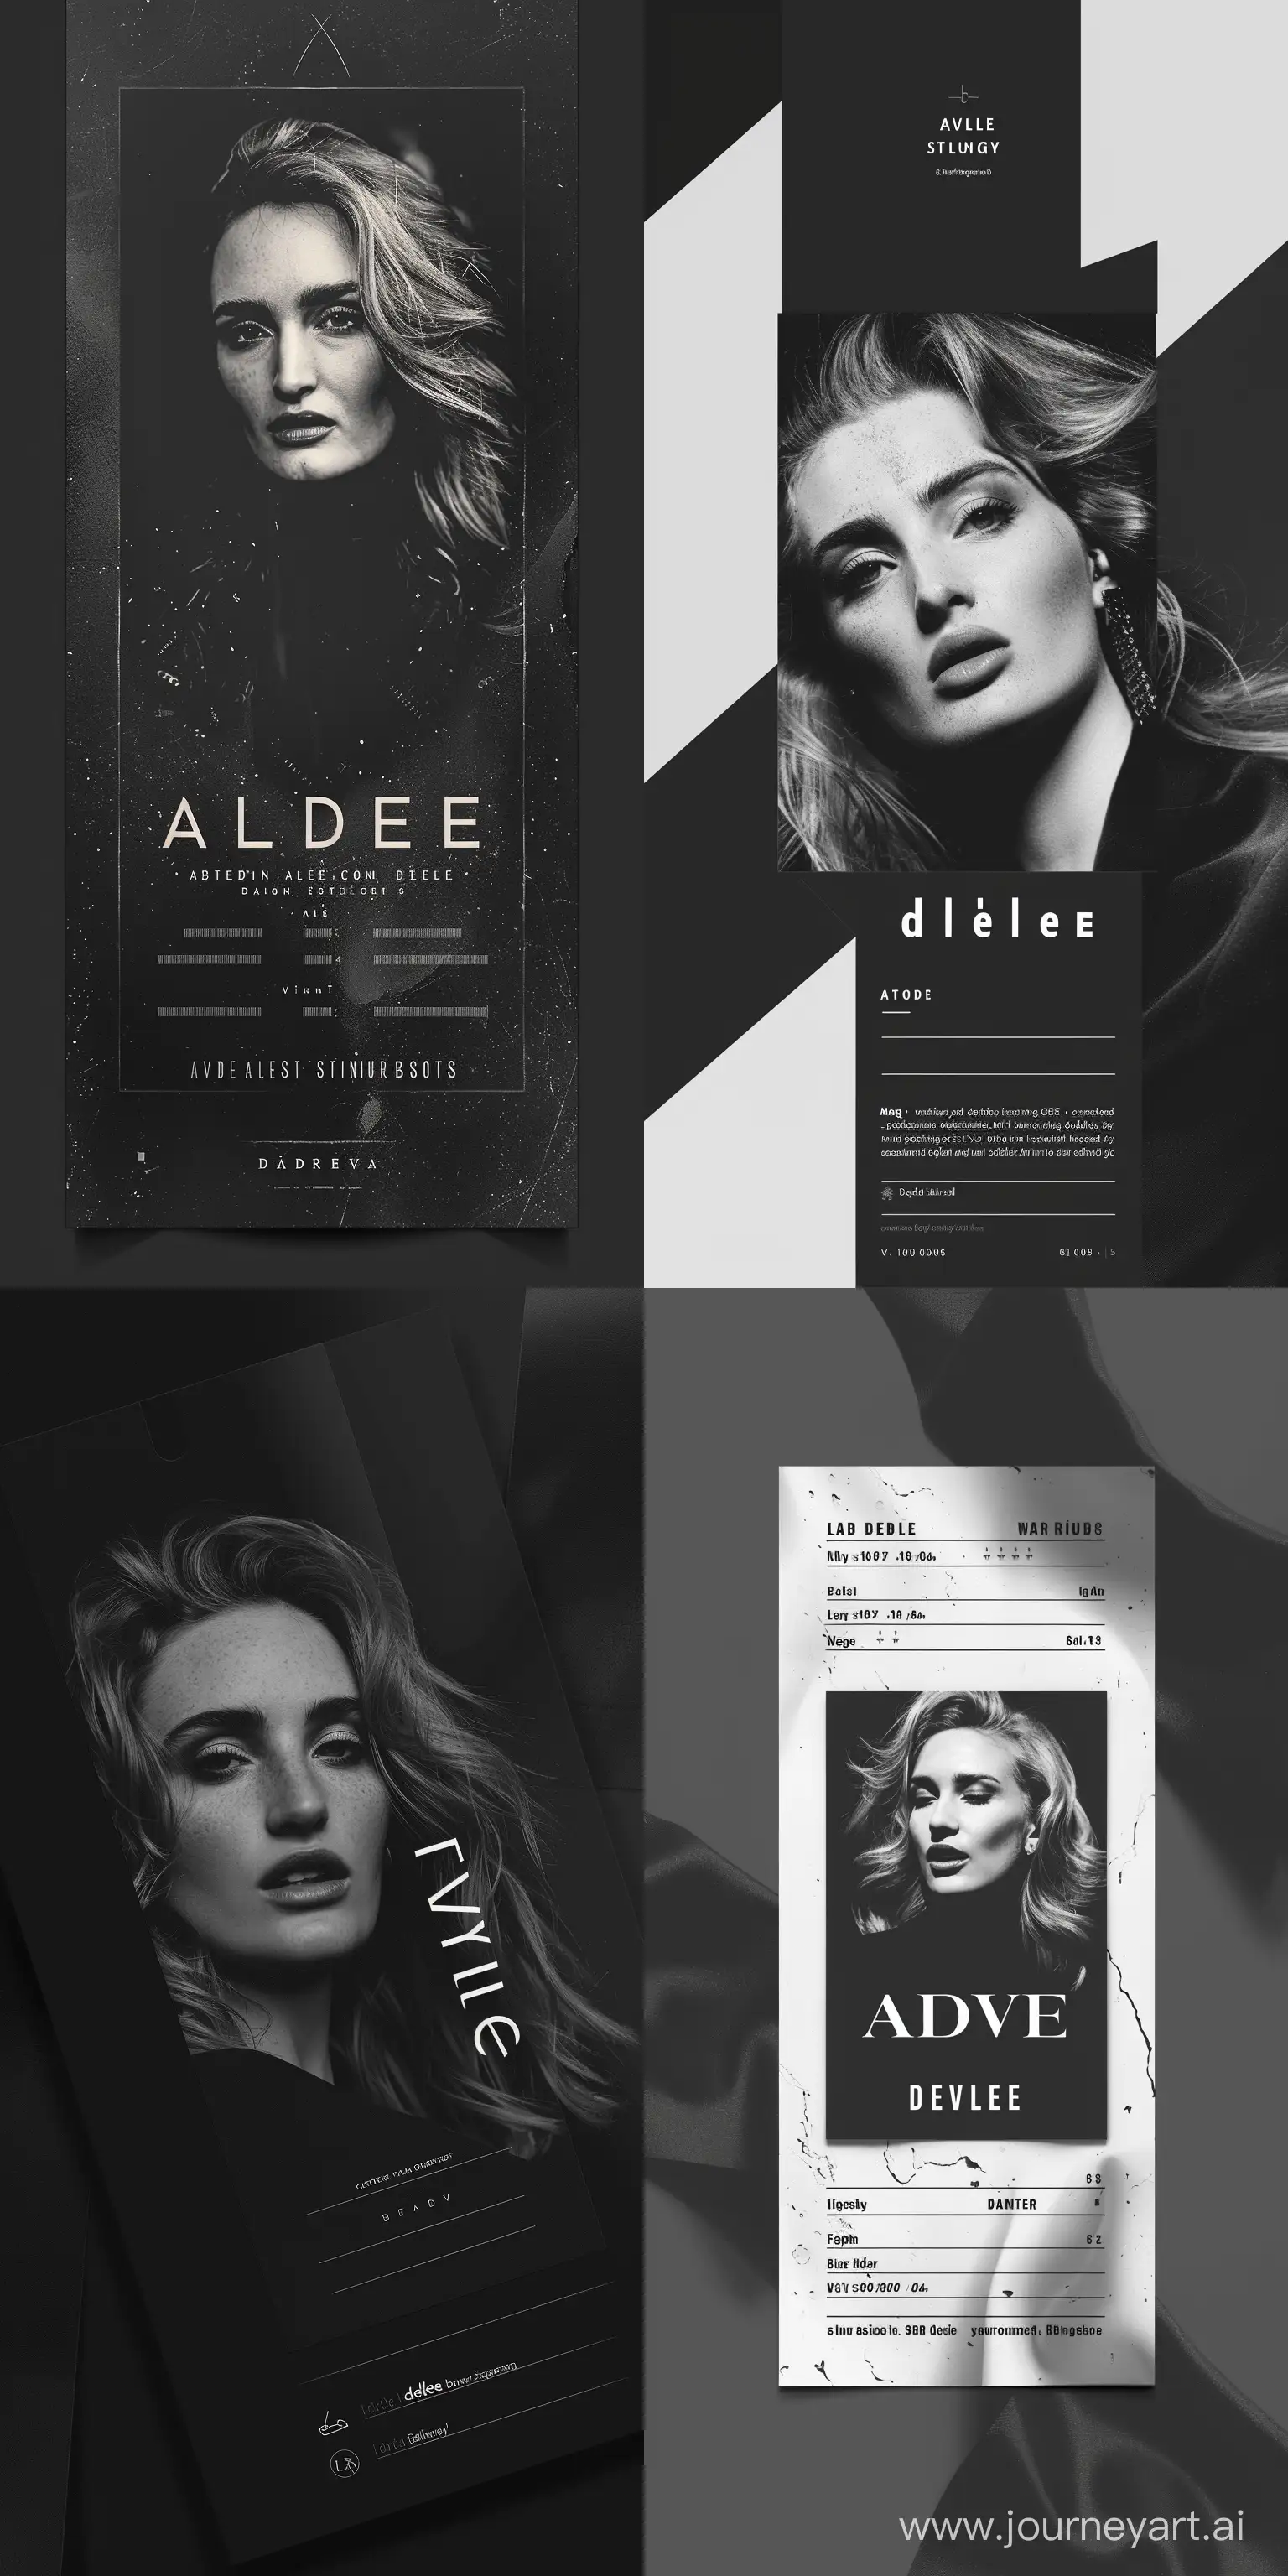 Make me a custom ticket template with fields for text for Adelle music show in Munich. I want it black and white with Adelle photo in background.

--v 6 --ar 2:4 --style raw